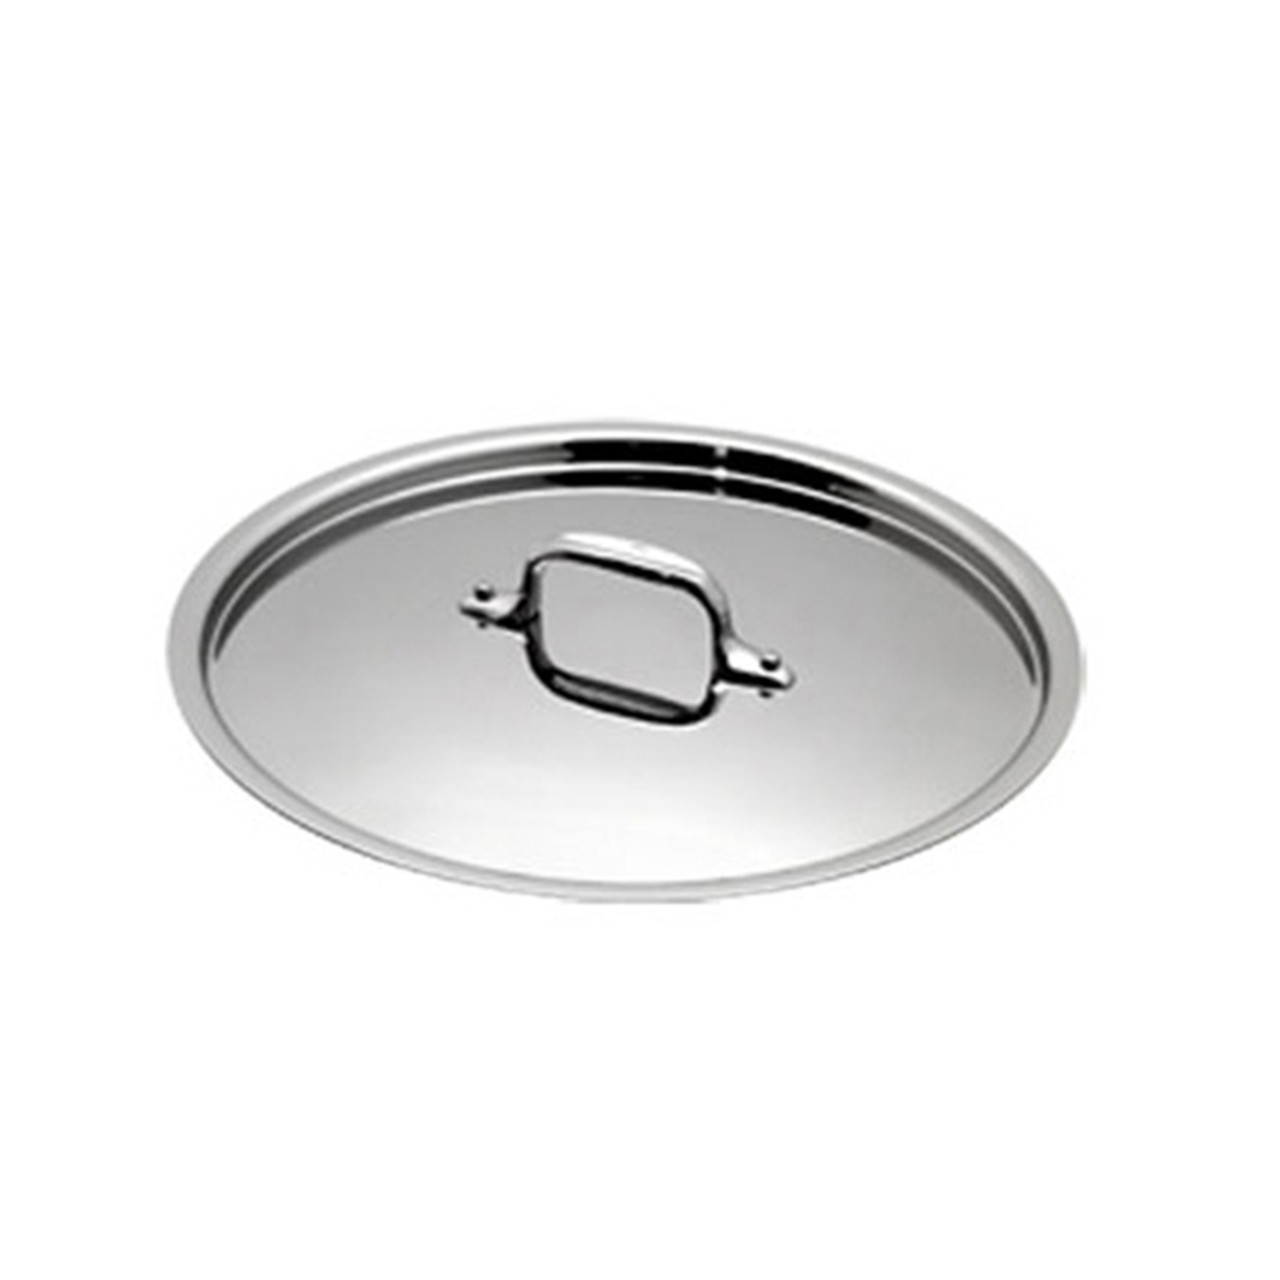 All-Clad 12 Glass Lid - Each